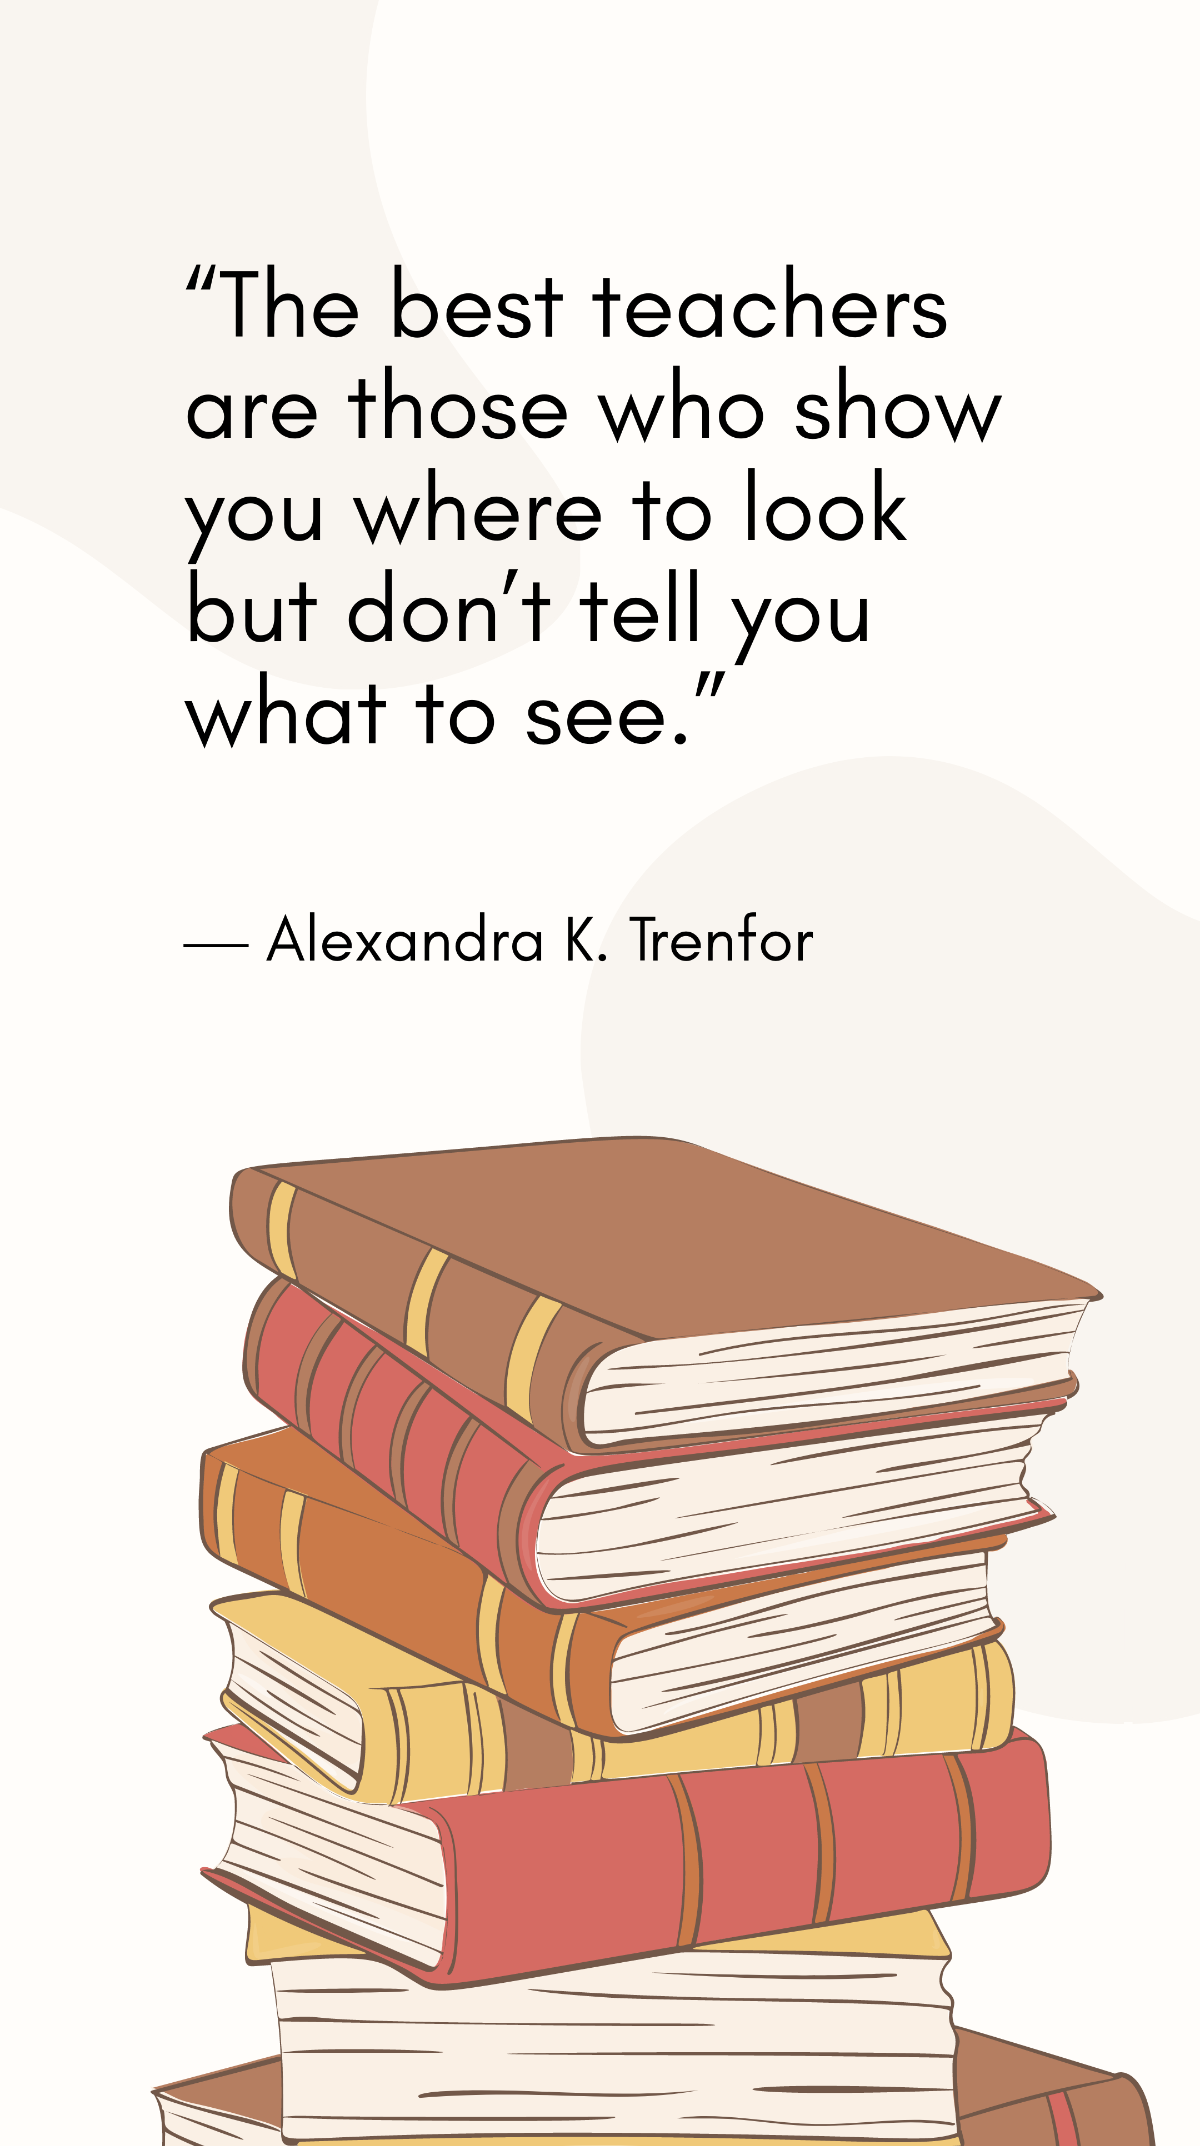 Alexandra K. Trenfor - The best teachers are those who show you where to look but don’t tell you what to see.